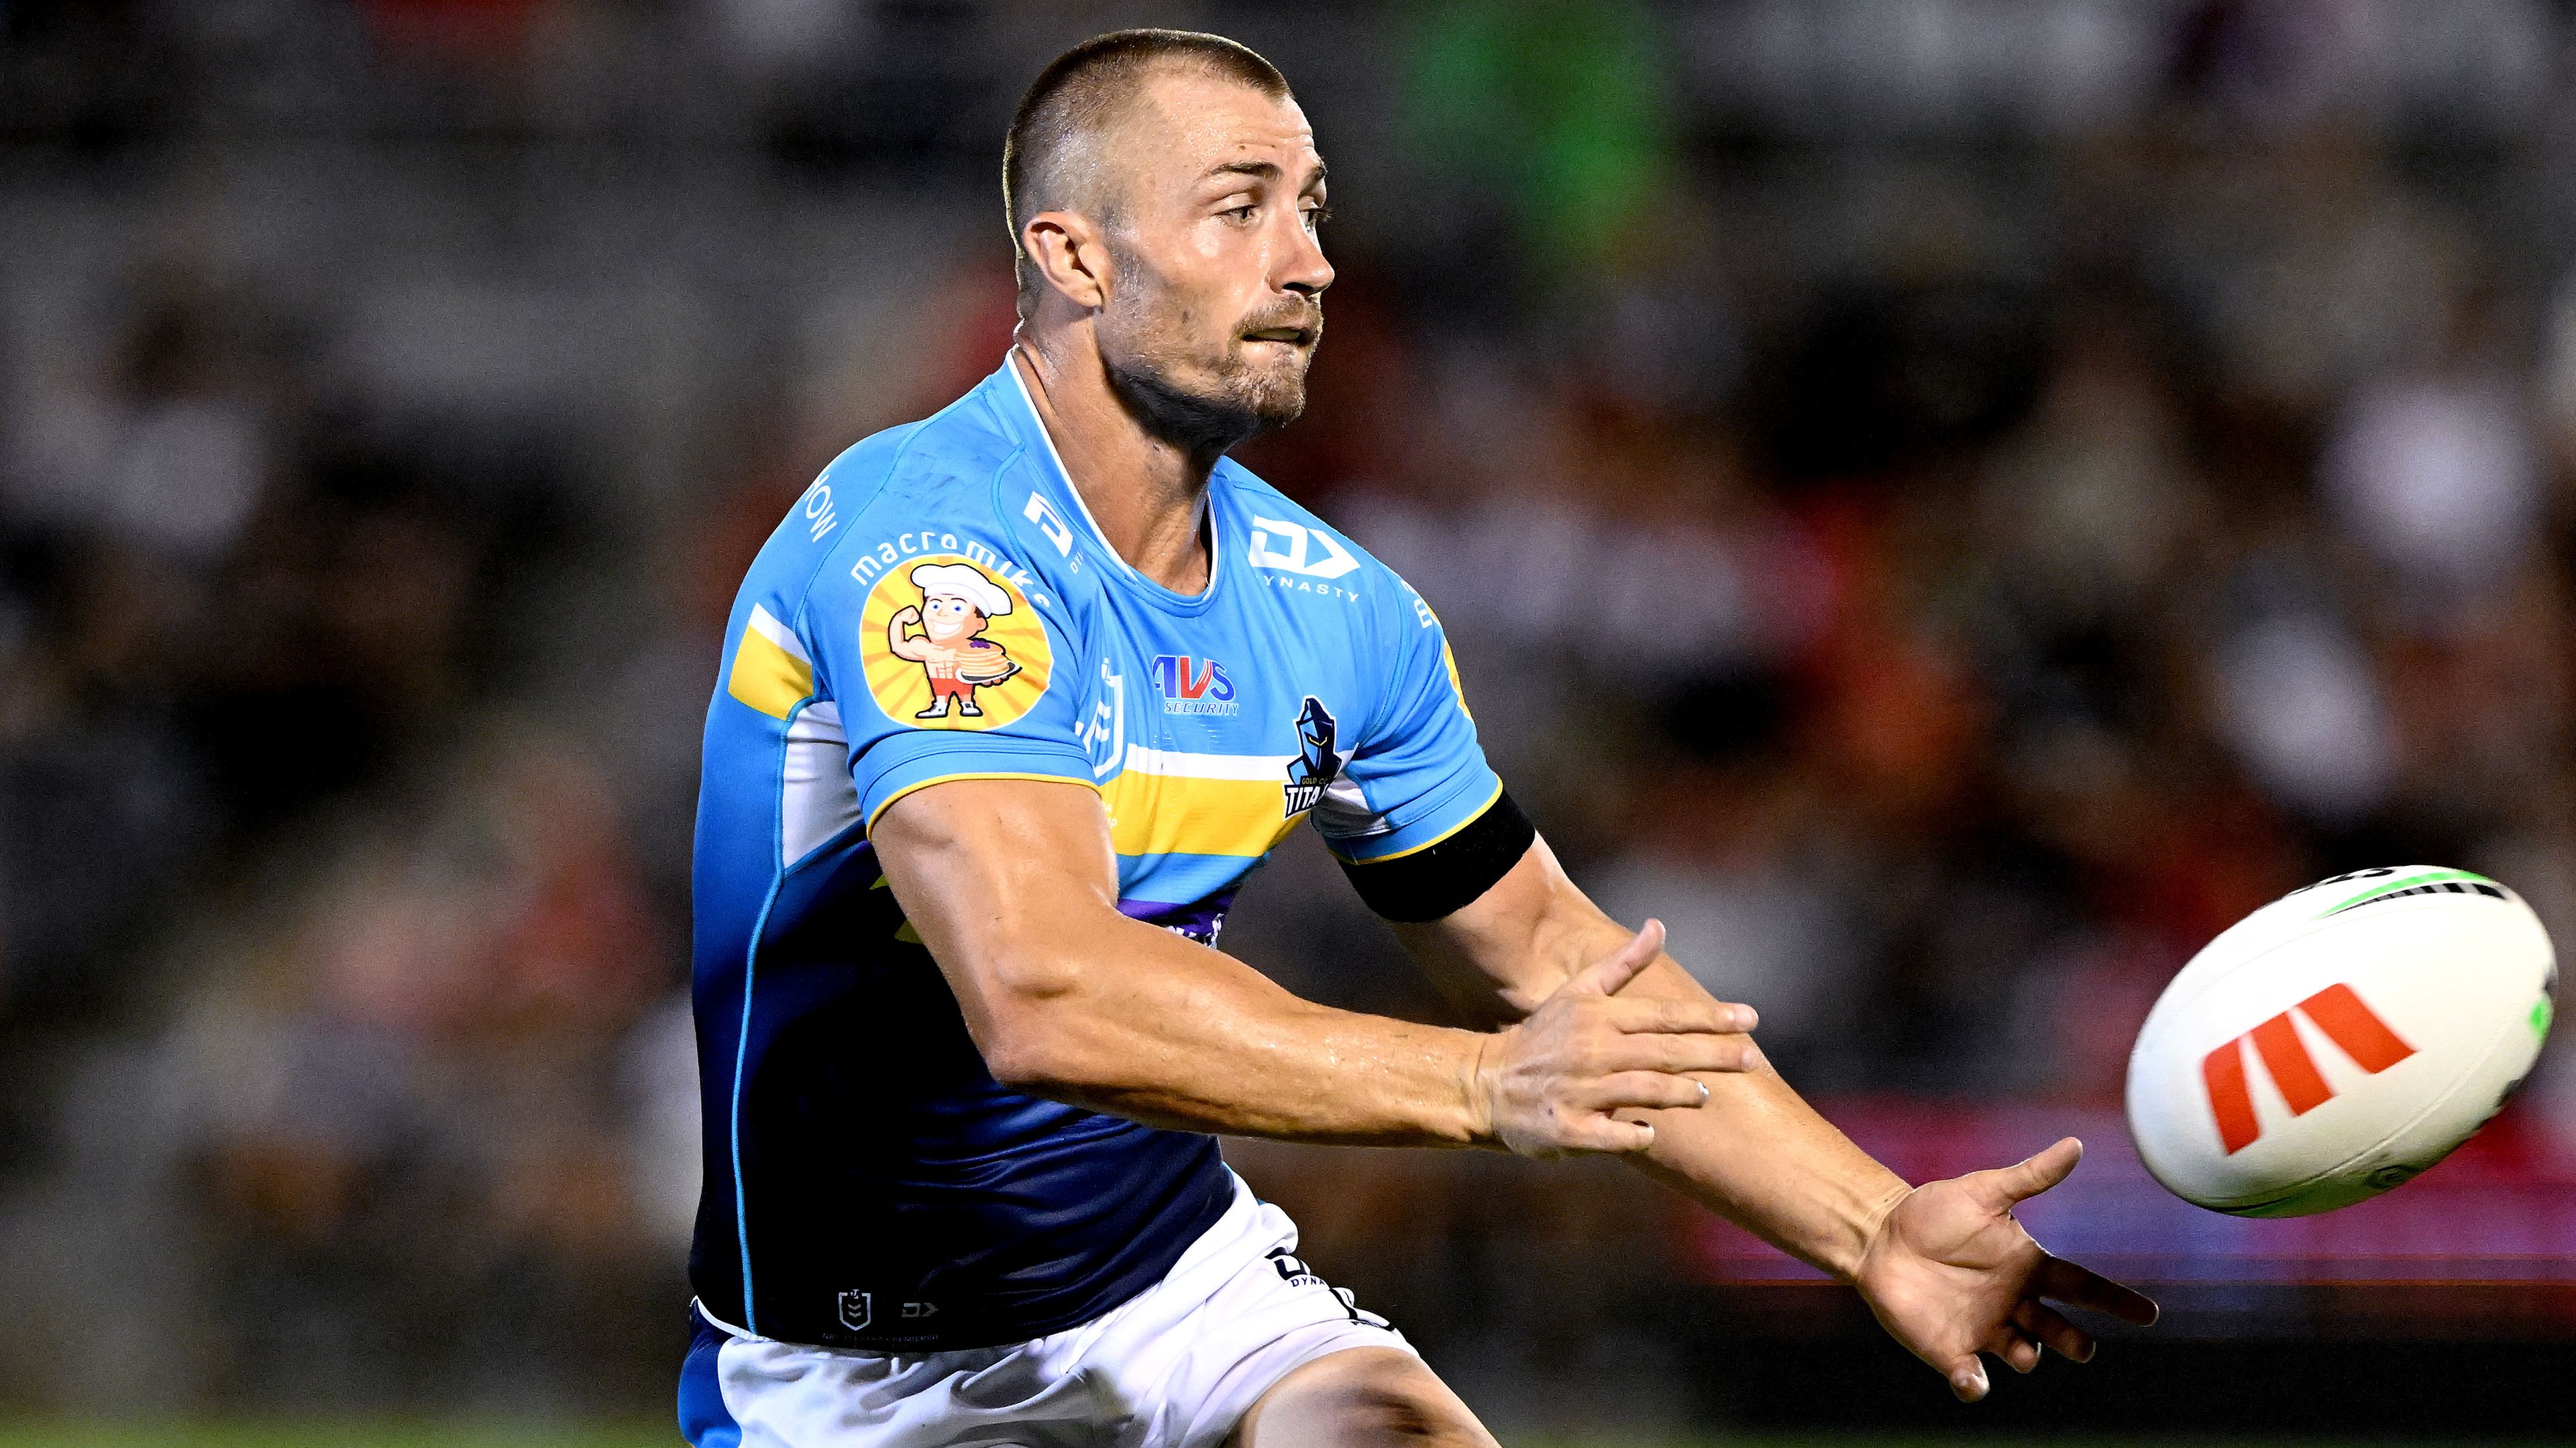 BRISBANE, AUSTRALIA - FEBRUARY 19: Kieran Foran of the Titans passes the ball during the NRL Trial Match between the Dolphins and the Gold Coast Titans at Kayo Stadium on February 19, 2023 in Brisbane, Australia. (Photo by Bradley Kanaris/Getty Images)